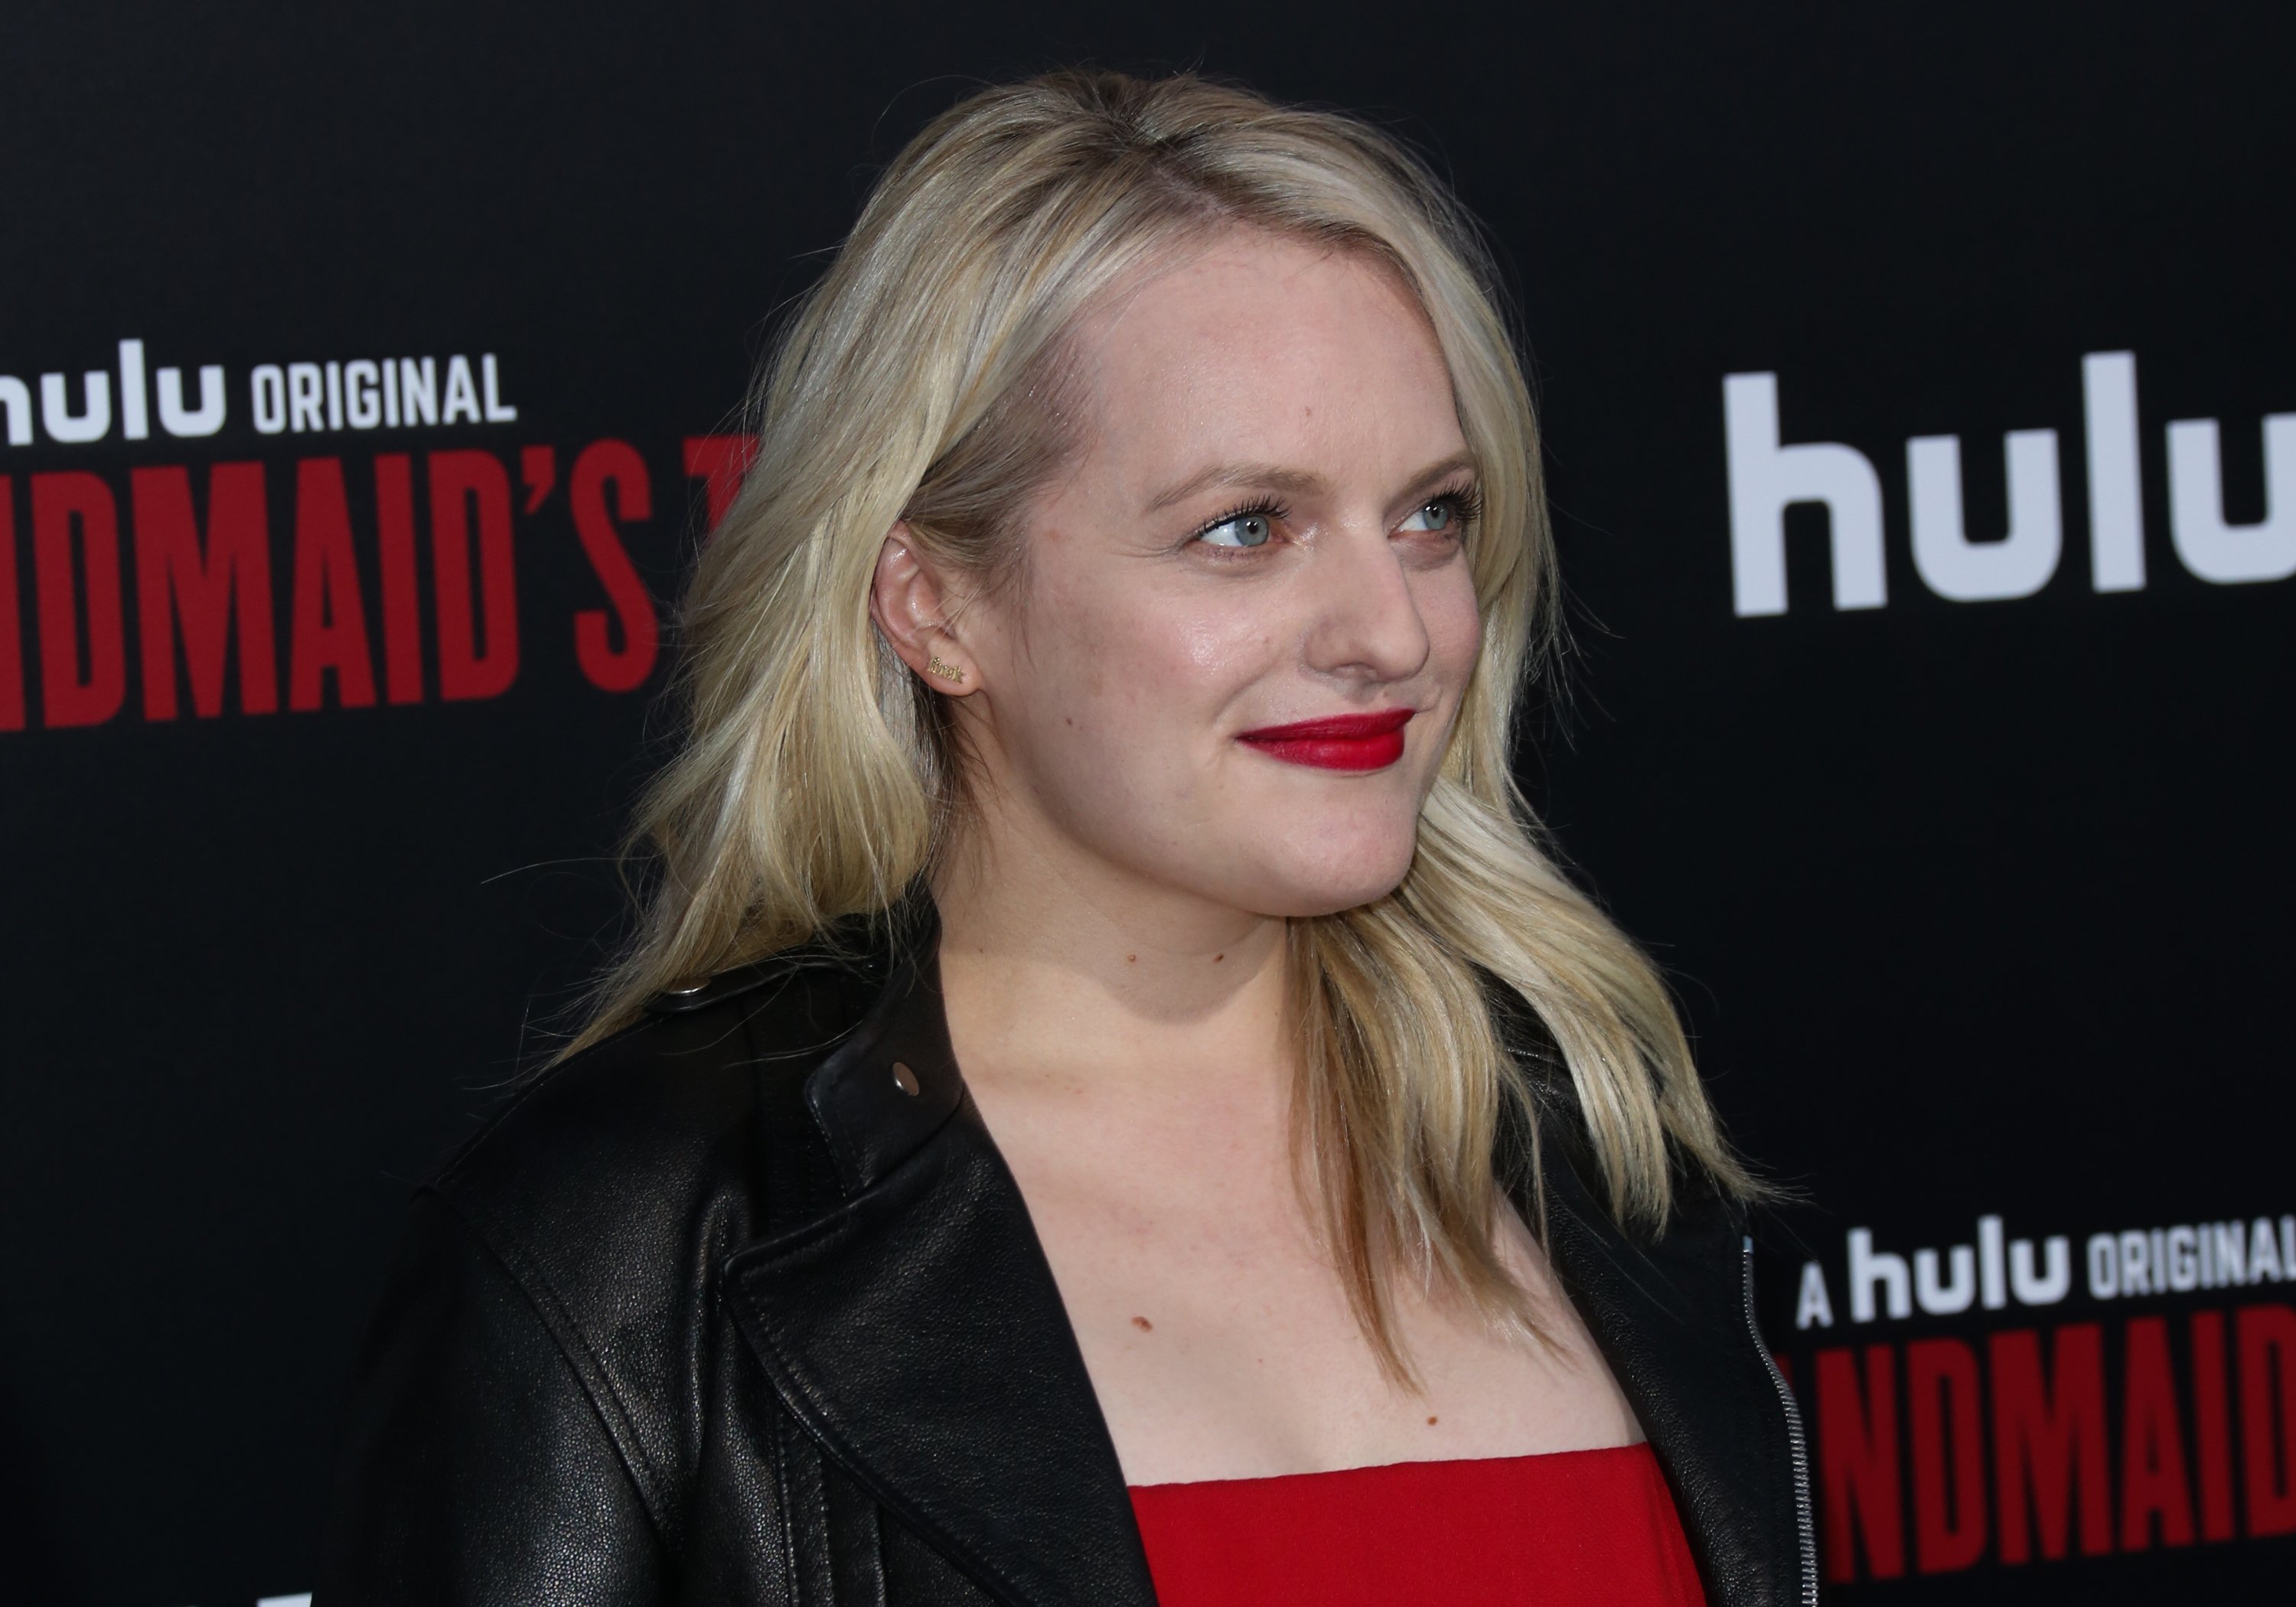 Actress Elisabeth Moss attends the premiere of Hulu's 'The Handmaid's Tale' season 2